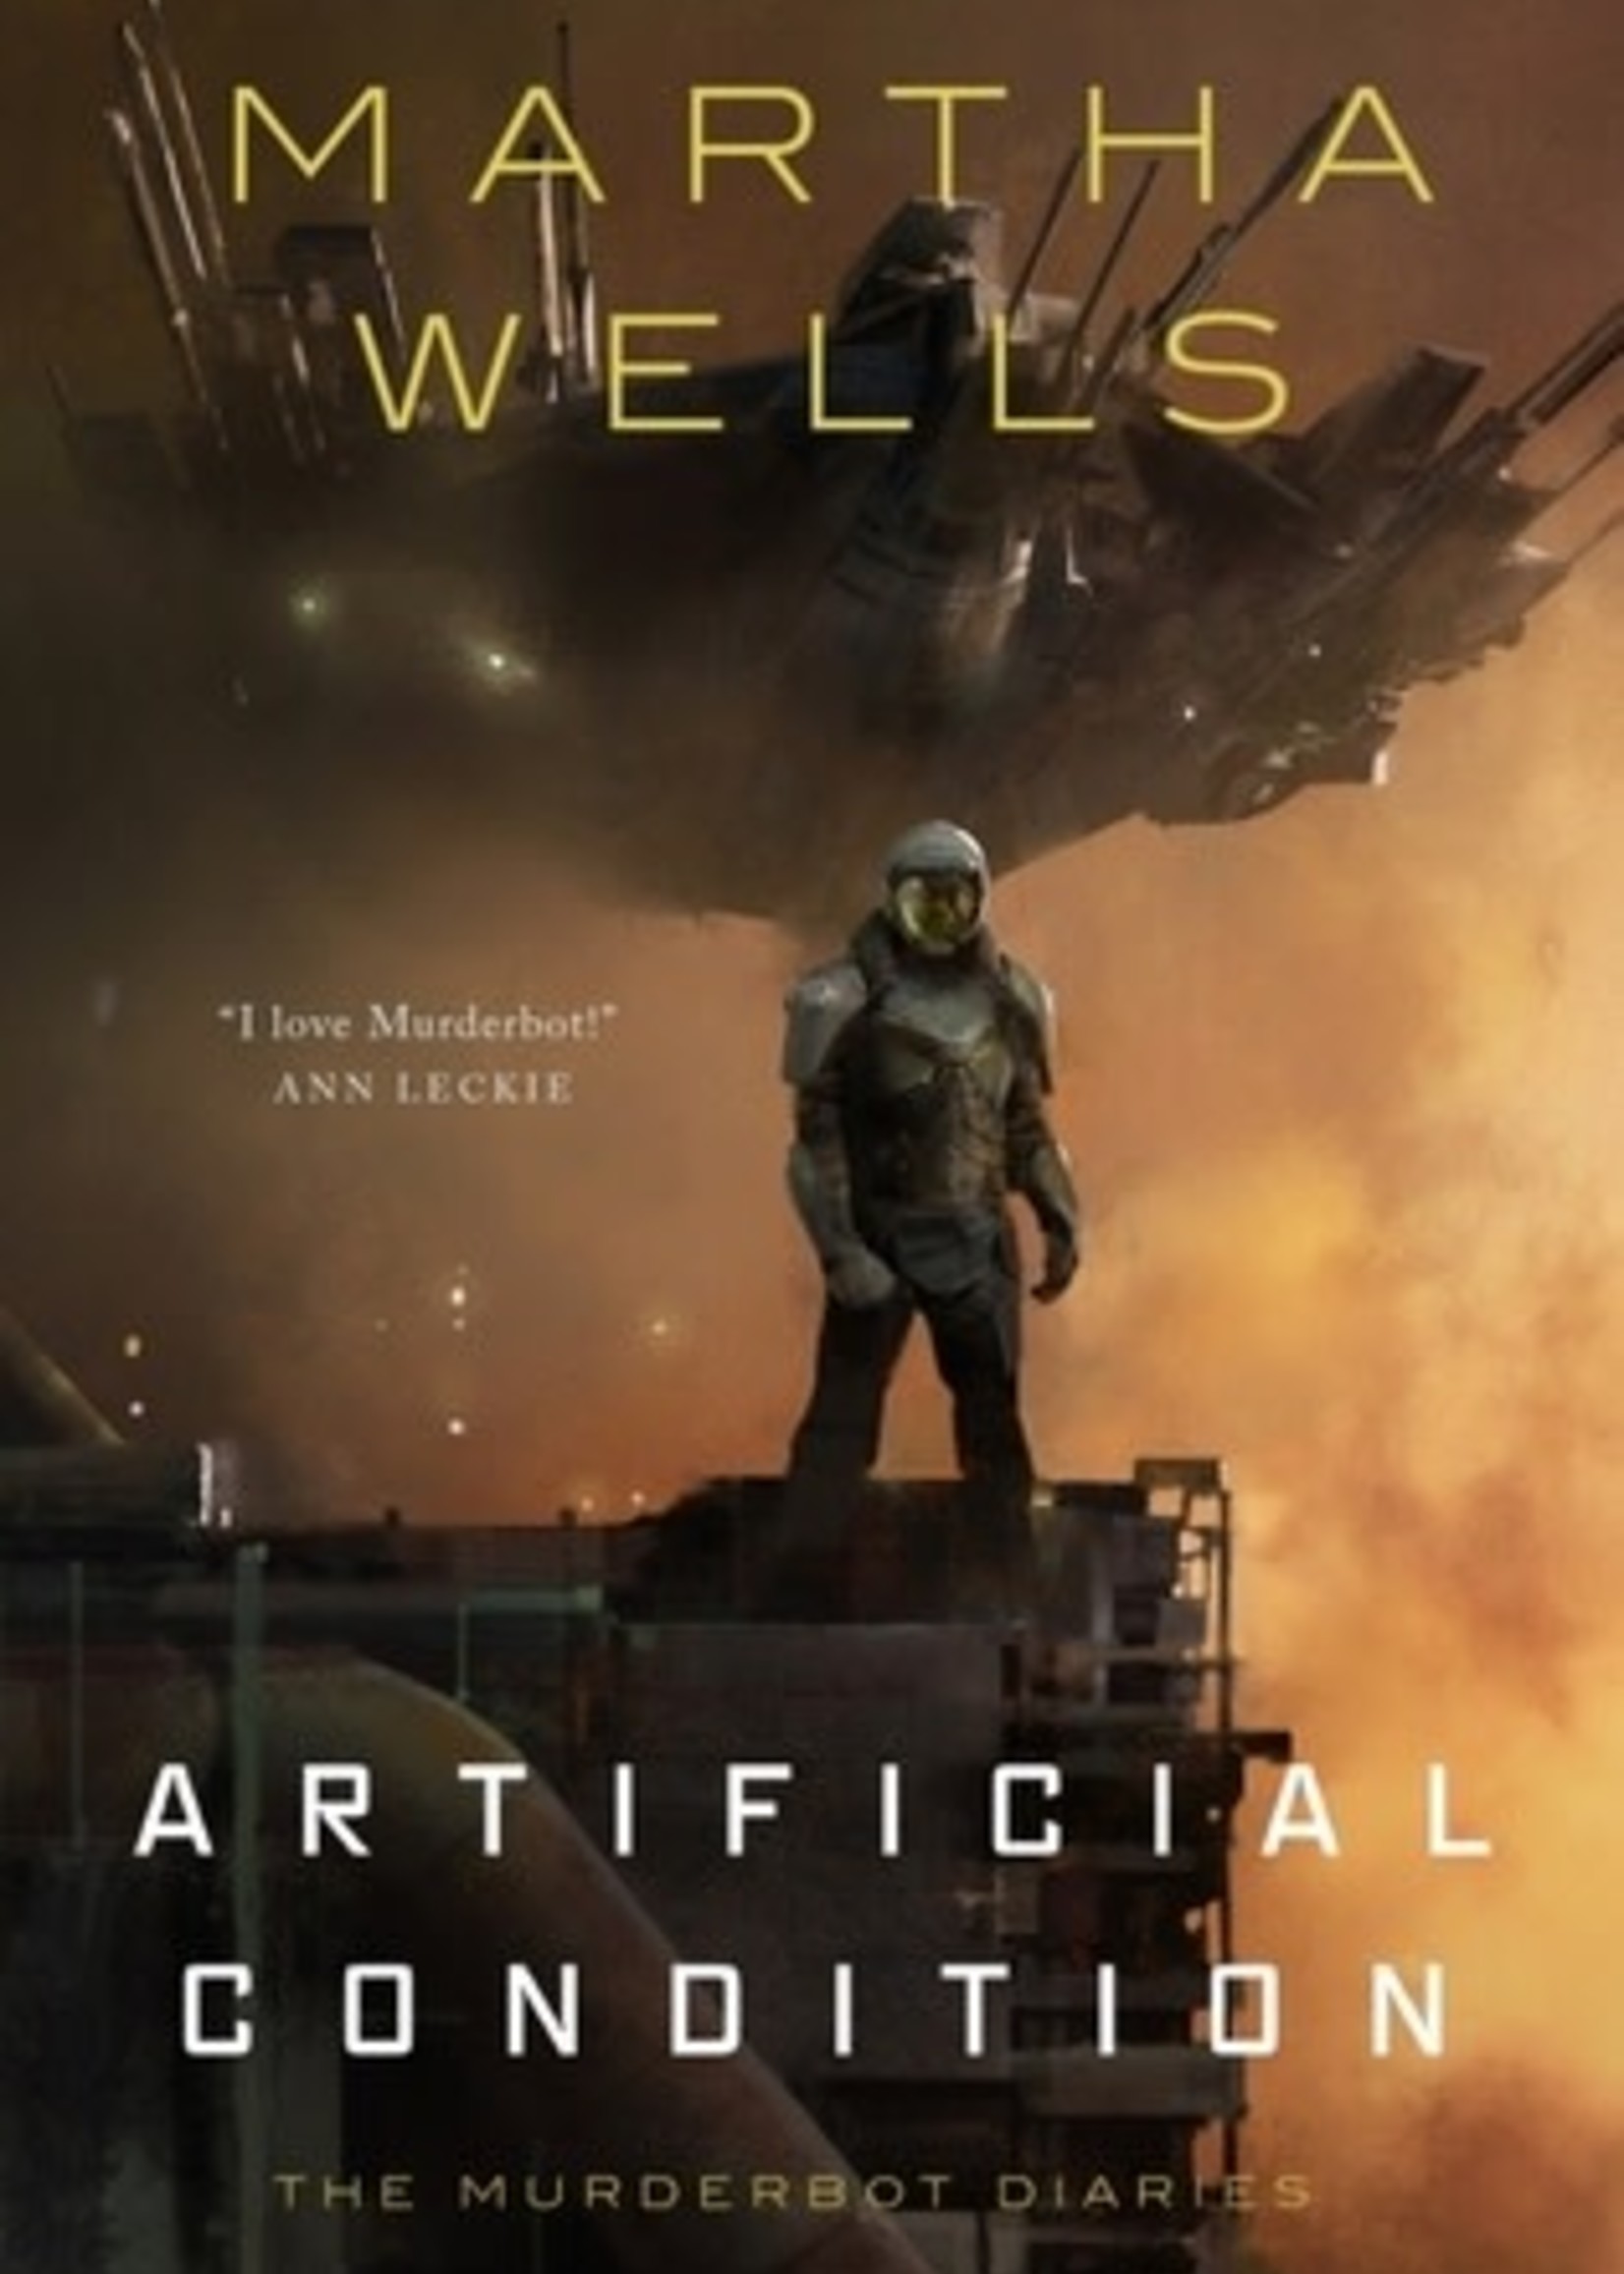 Artificial Condition (The Murderbot Diaries #2) by Martha Wells